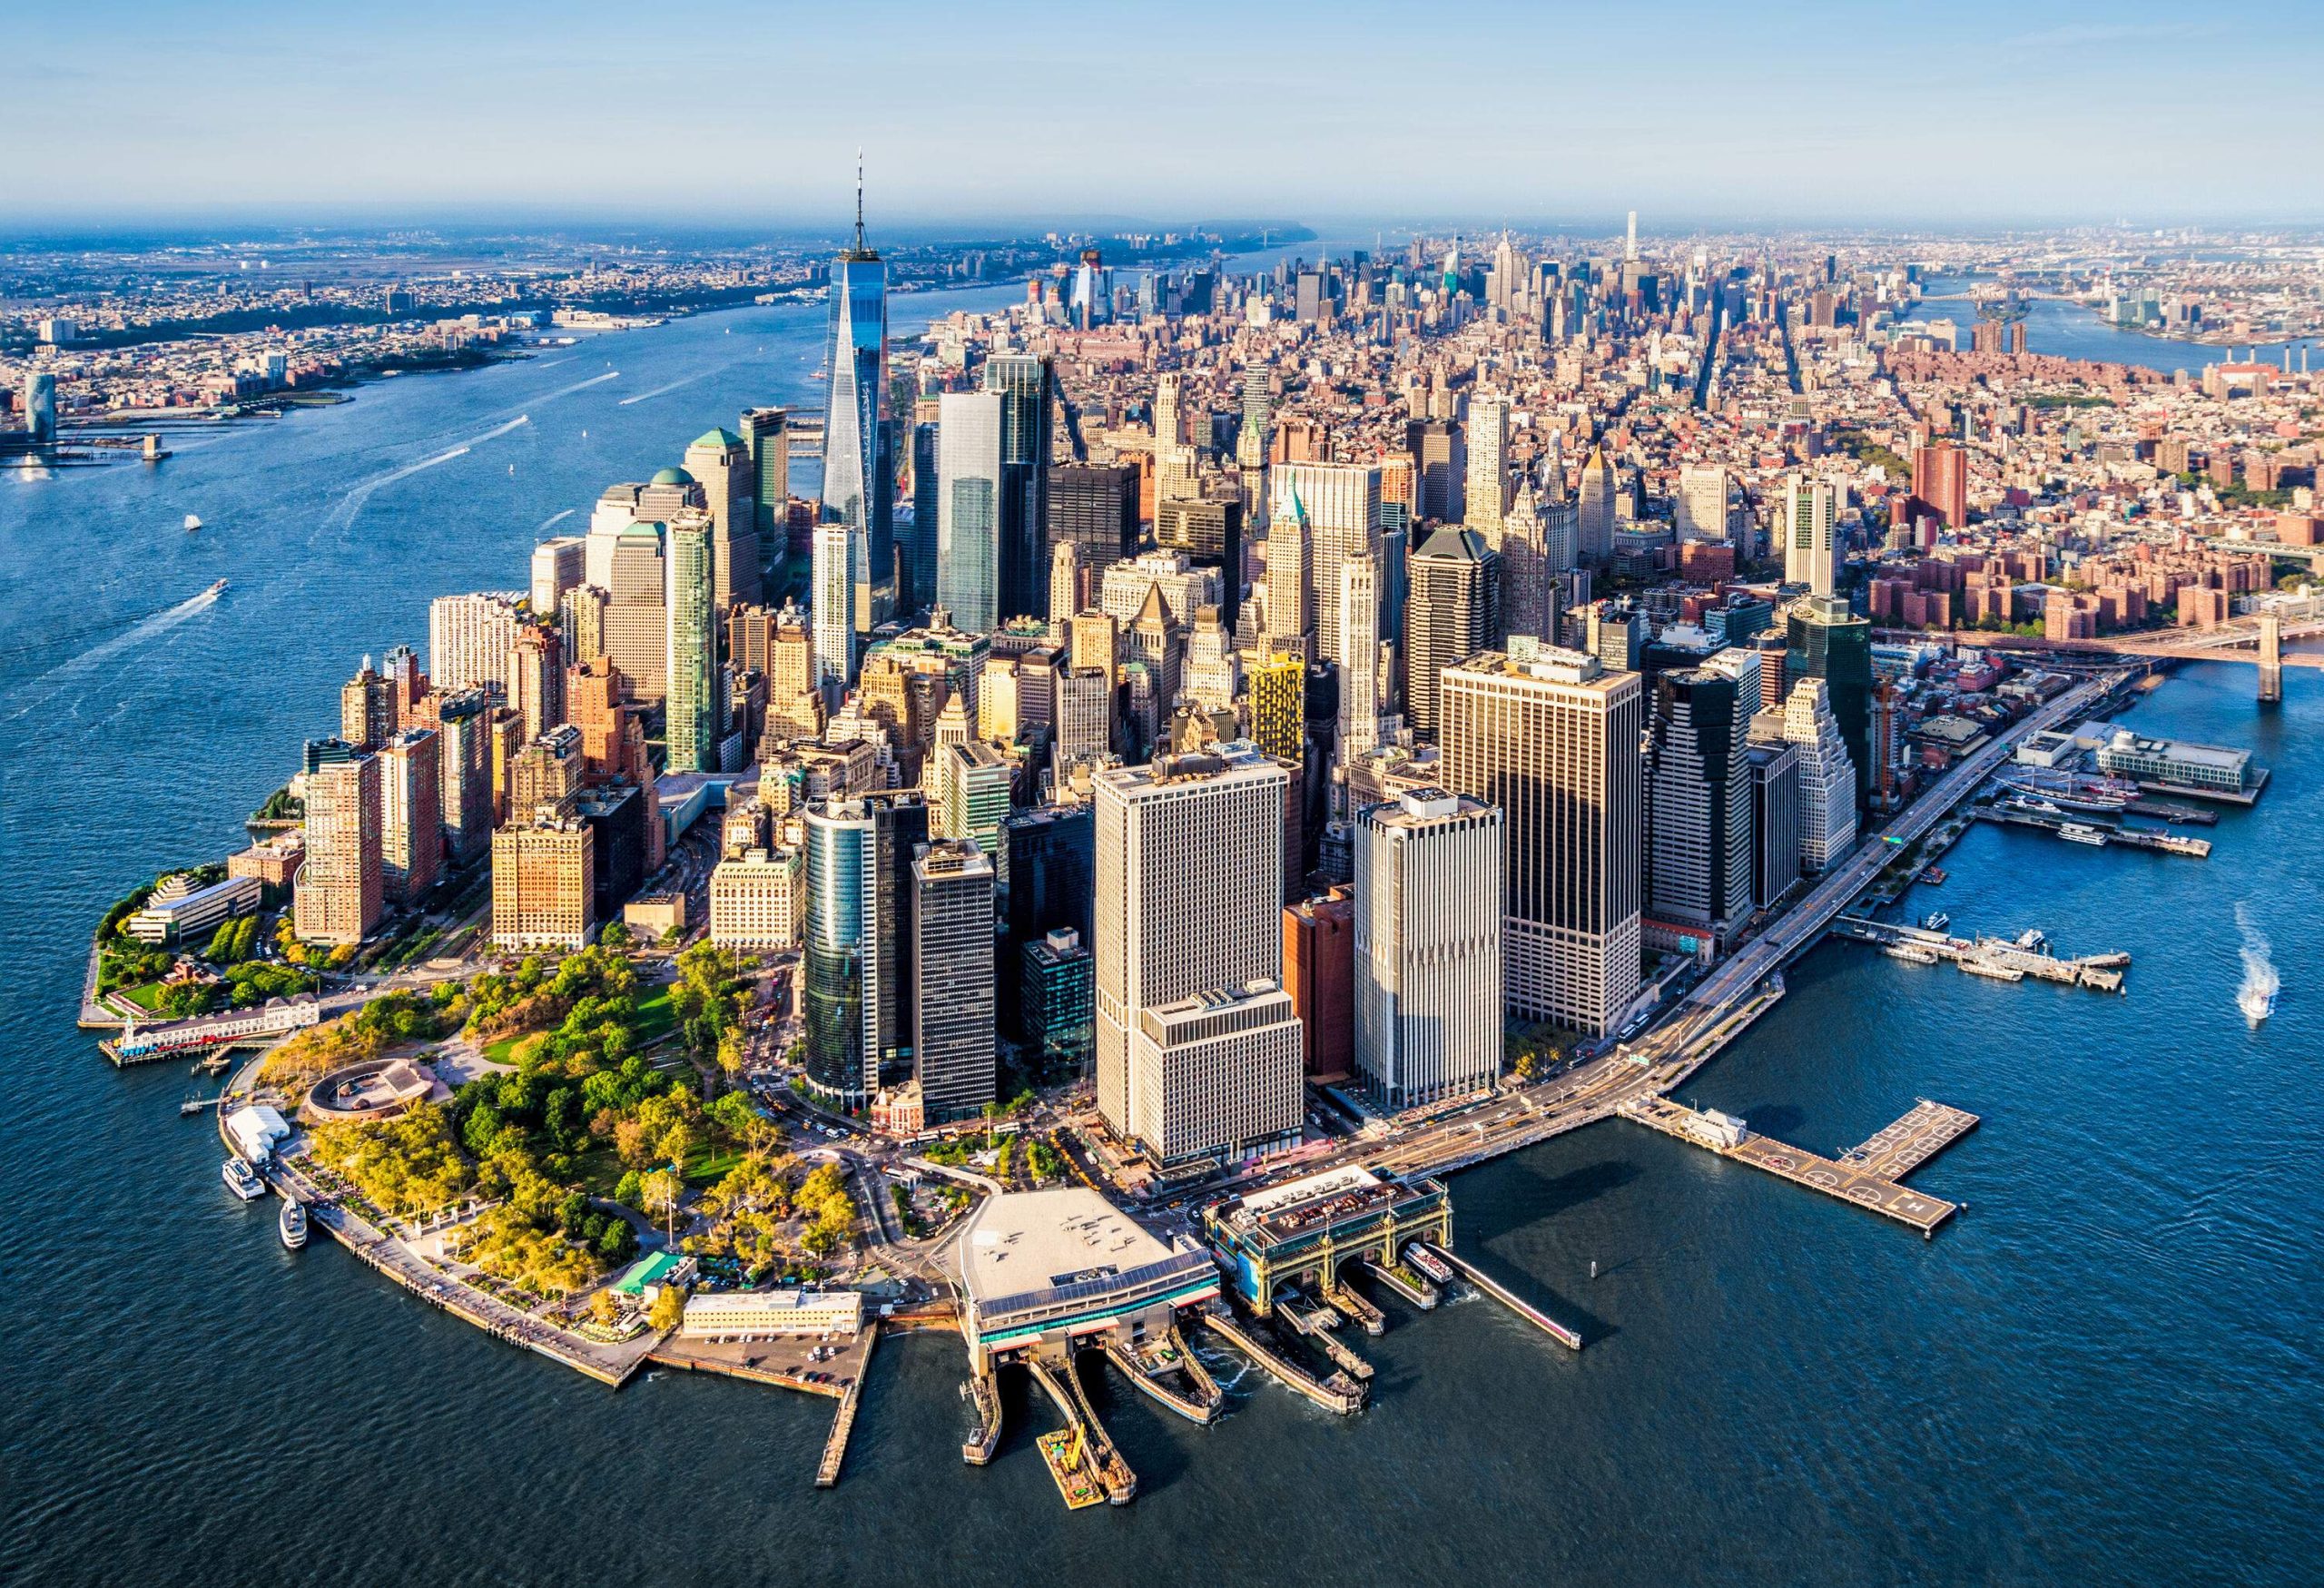 Lower Manhattan, the vibrant financial district of New York City, is surrounded by the glistening waters of the Hudson River and the East River, with its iconic skyscrapers and bustling streets.